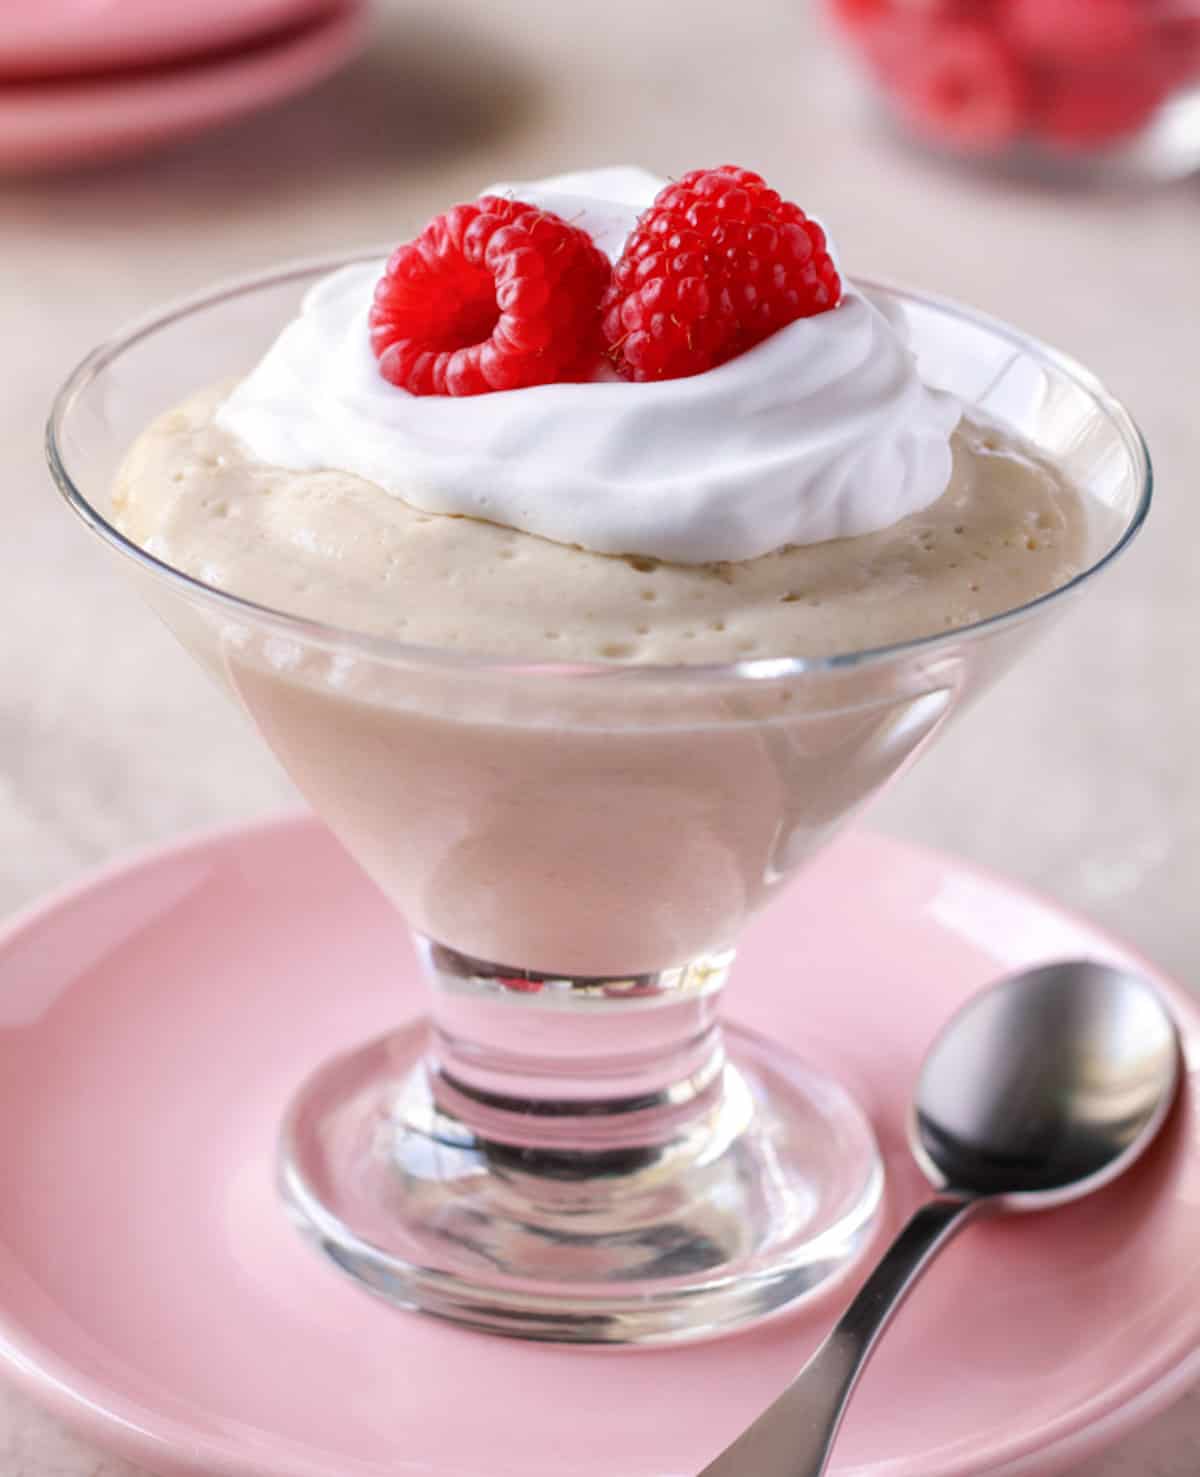 Silken tofu pudding in a dessert glass with whipped cream and raspberries